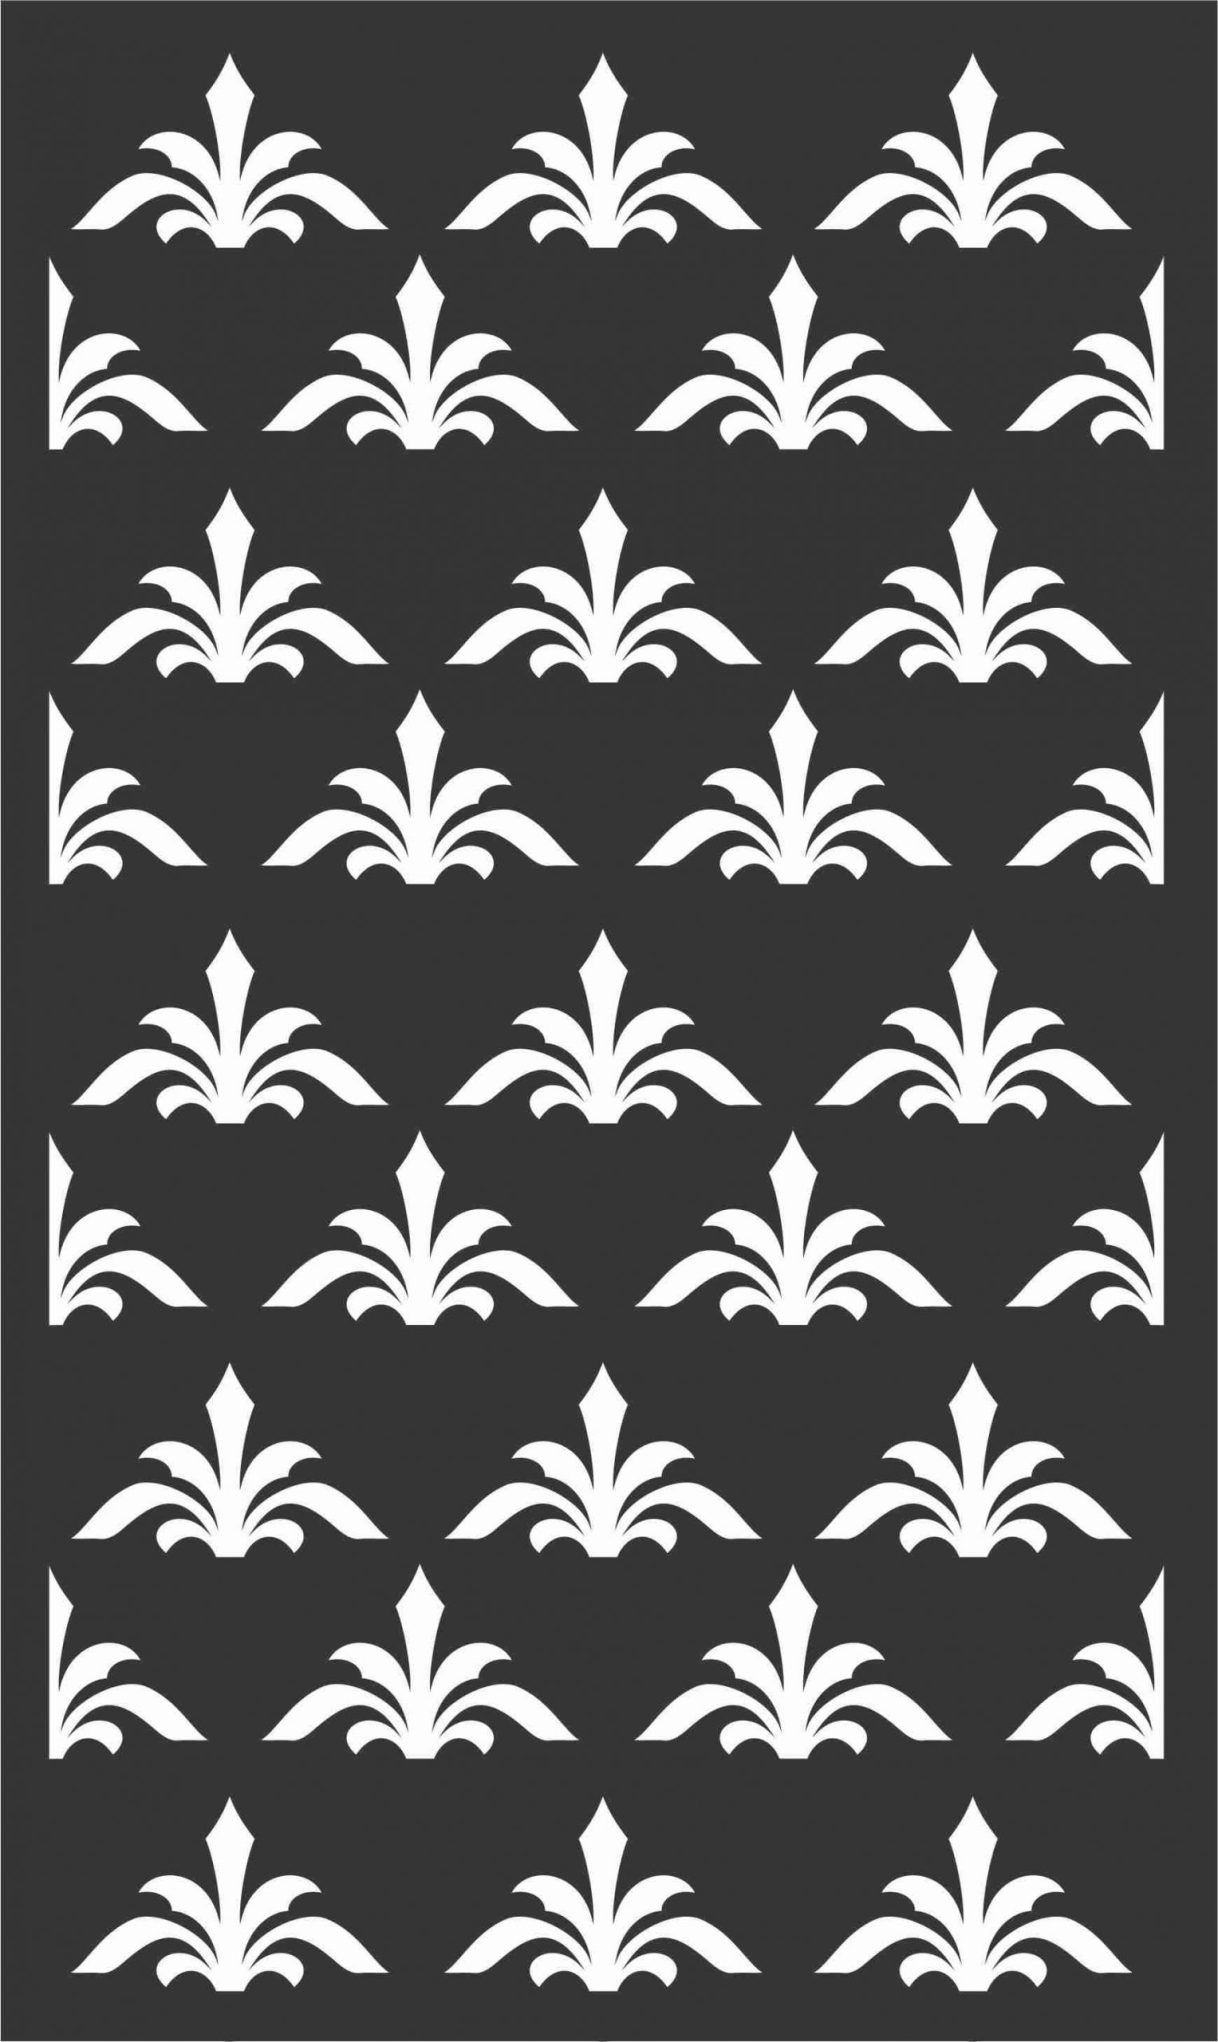 Floral Screen Patterns Design 66 Free DXF File